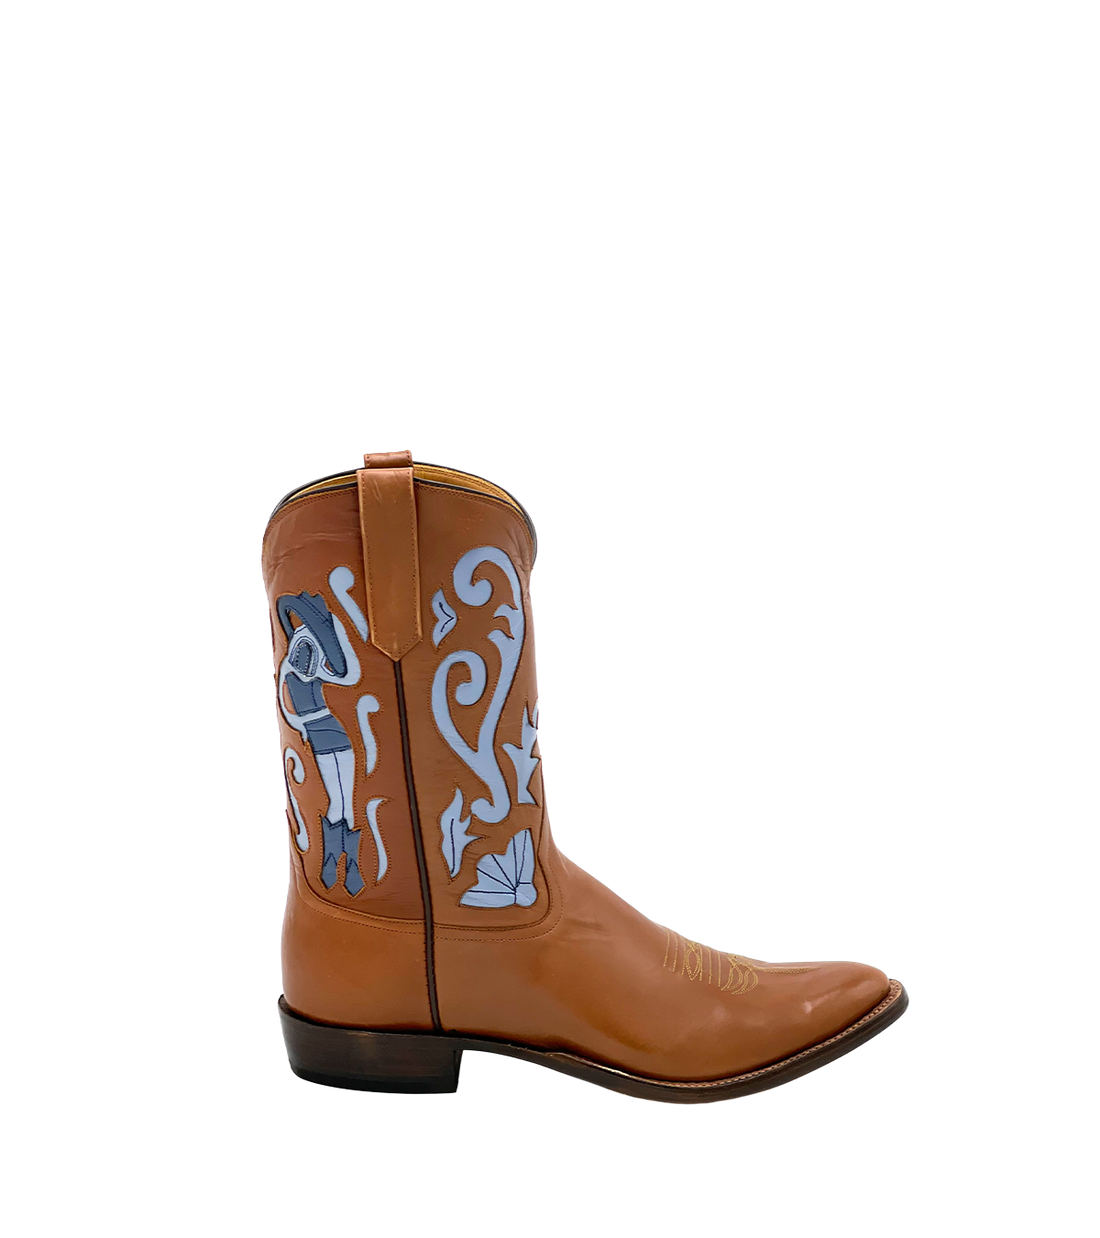 Cleaning/conditioning for women's embroidered boots : r/cowboyboots